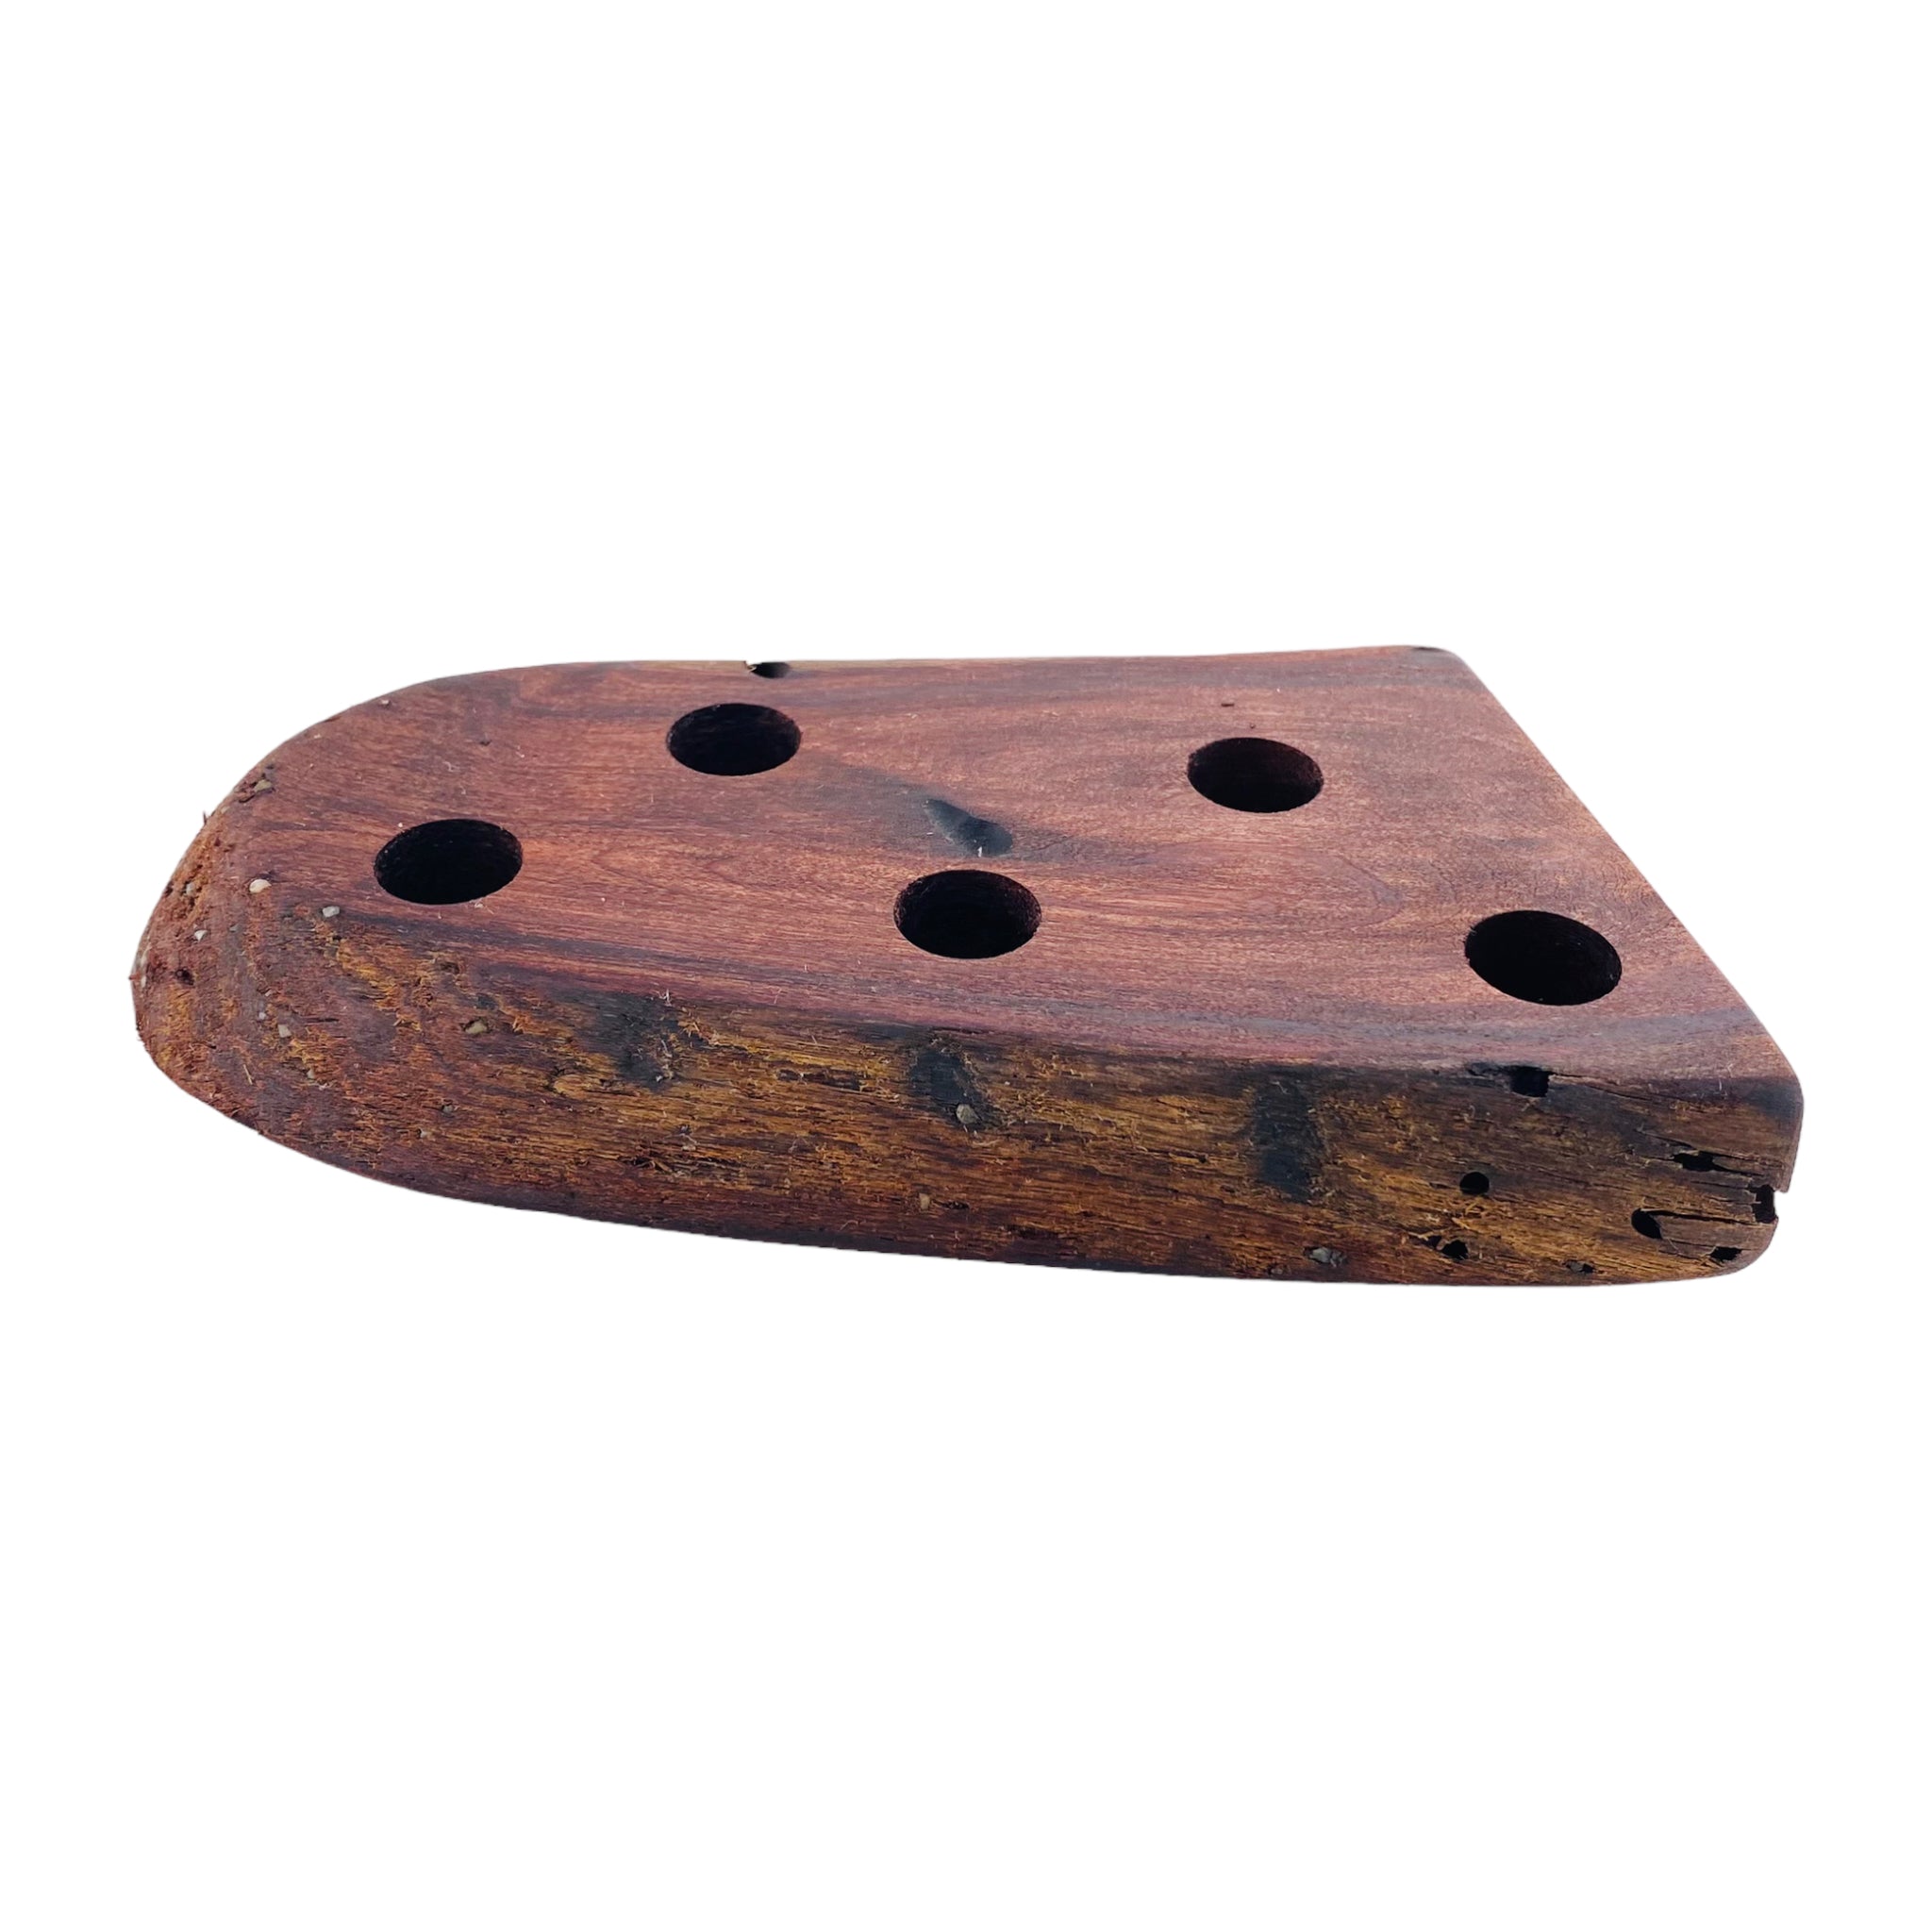 5 Hole Wood Display Stand Holder For 14mm Bong Bowl Pieces Or Quartz Bangers - Red Wood Burl With Live Edge #2